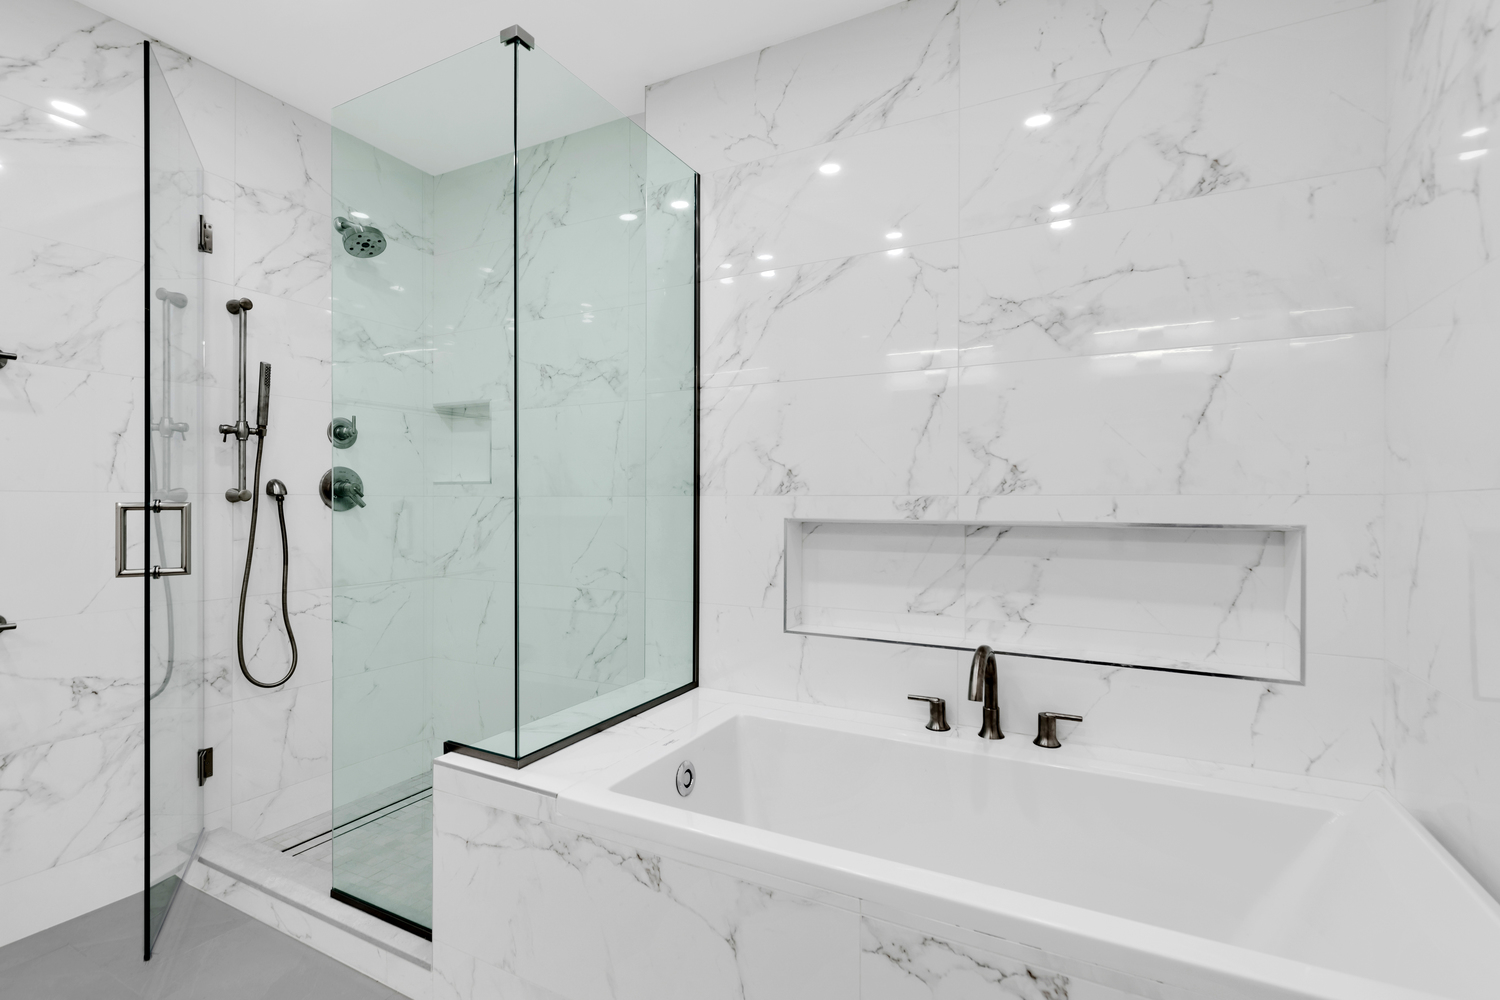 Remodeled bathroom with white tile walls, glass enclosed shower, and separate large tub.